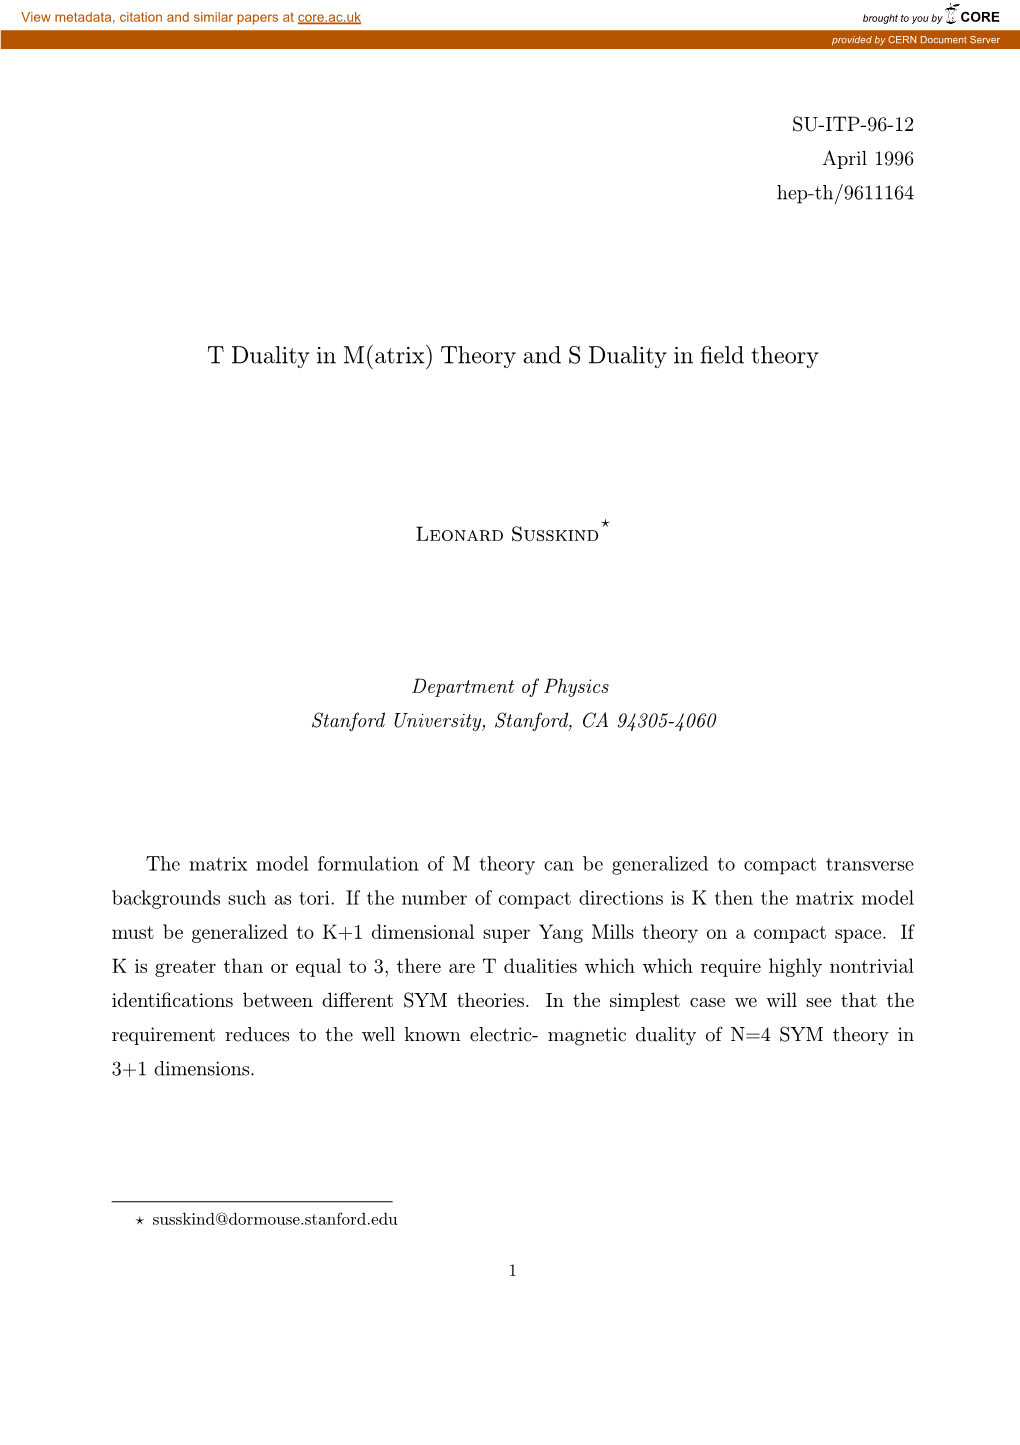 T Duality in M(Atrix) Theory and S Duality in Field Theory